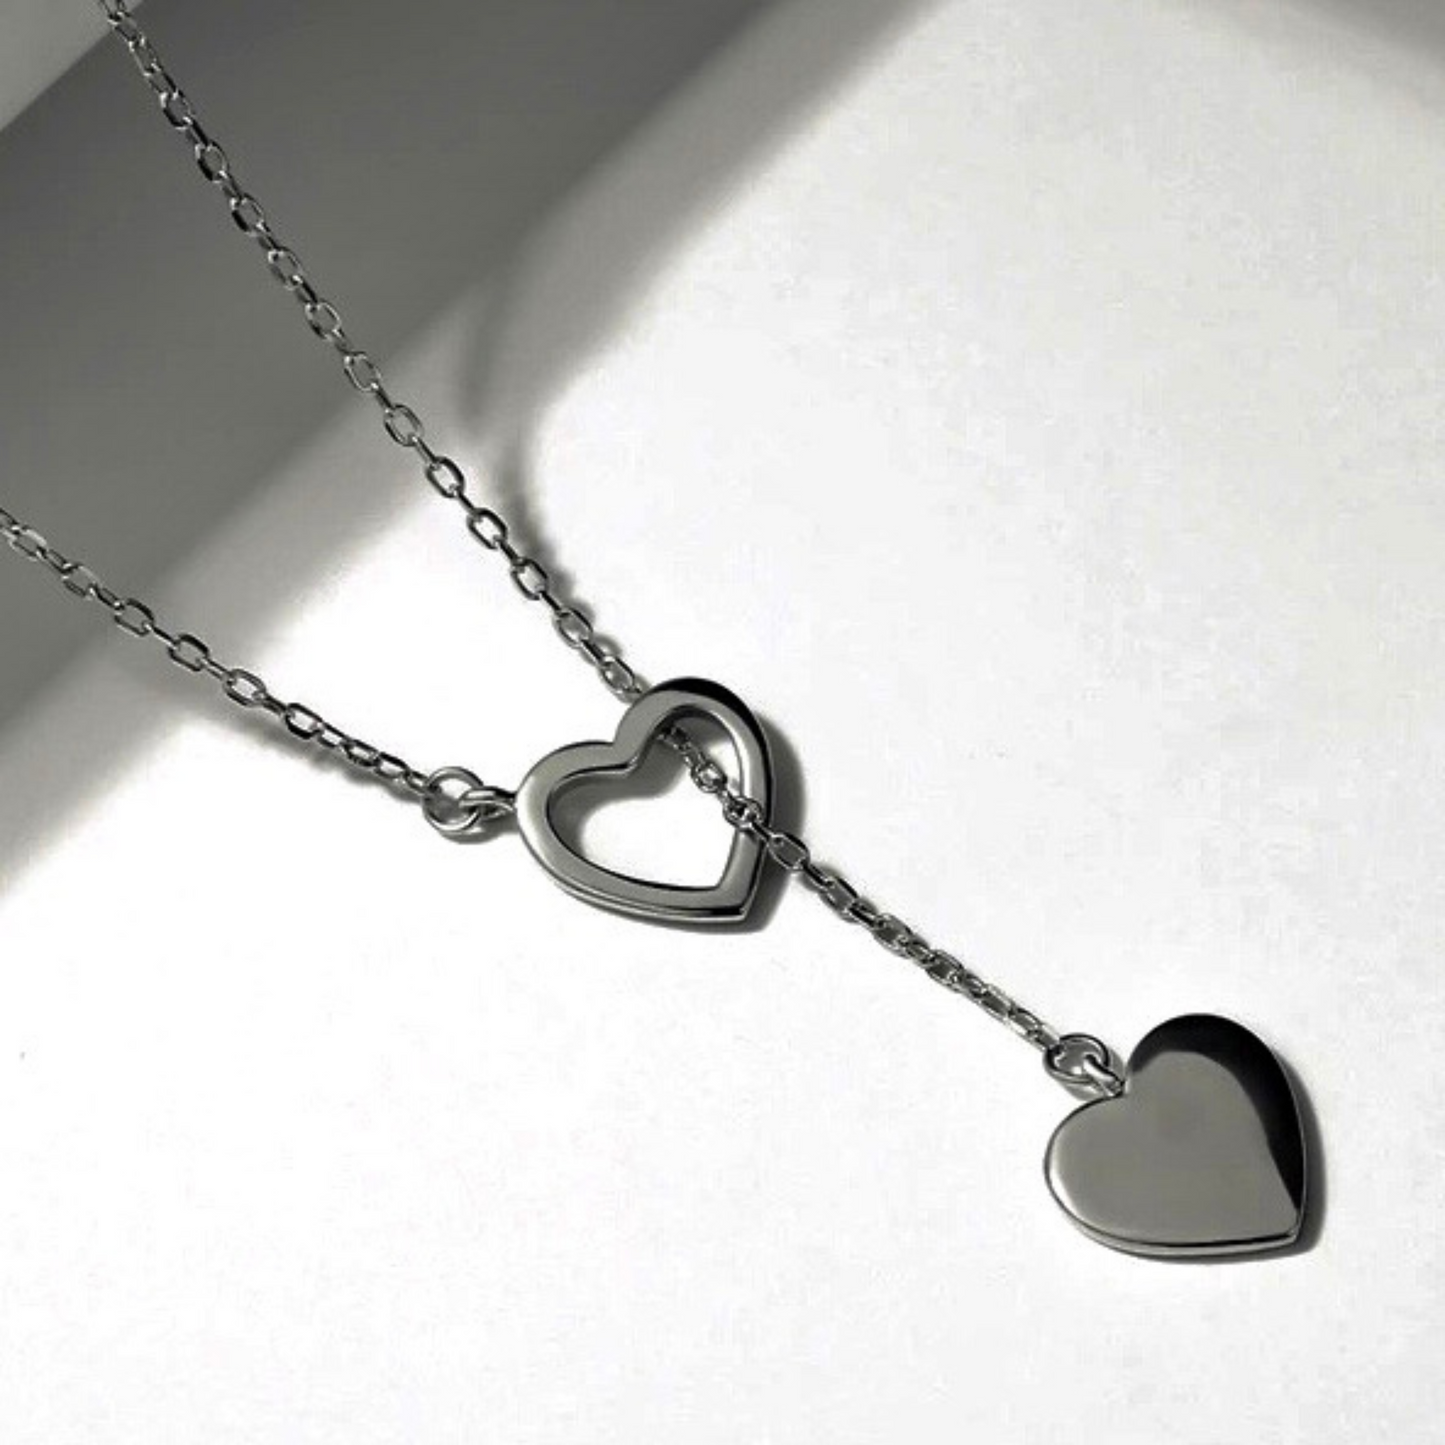 Chasing Hearts Necklace